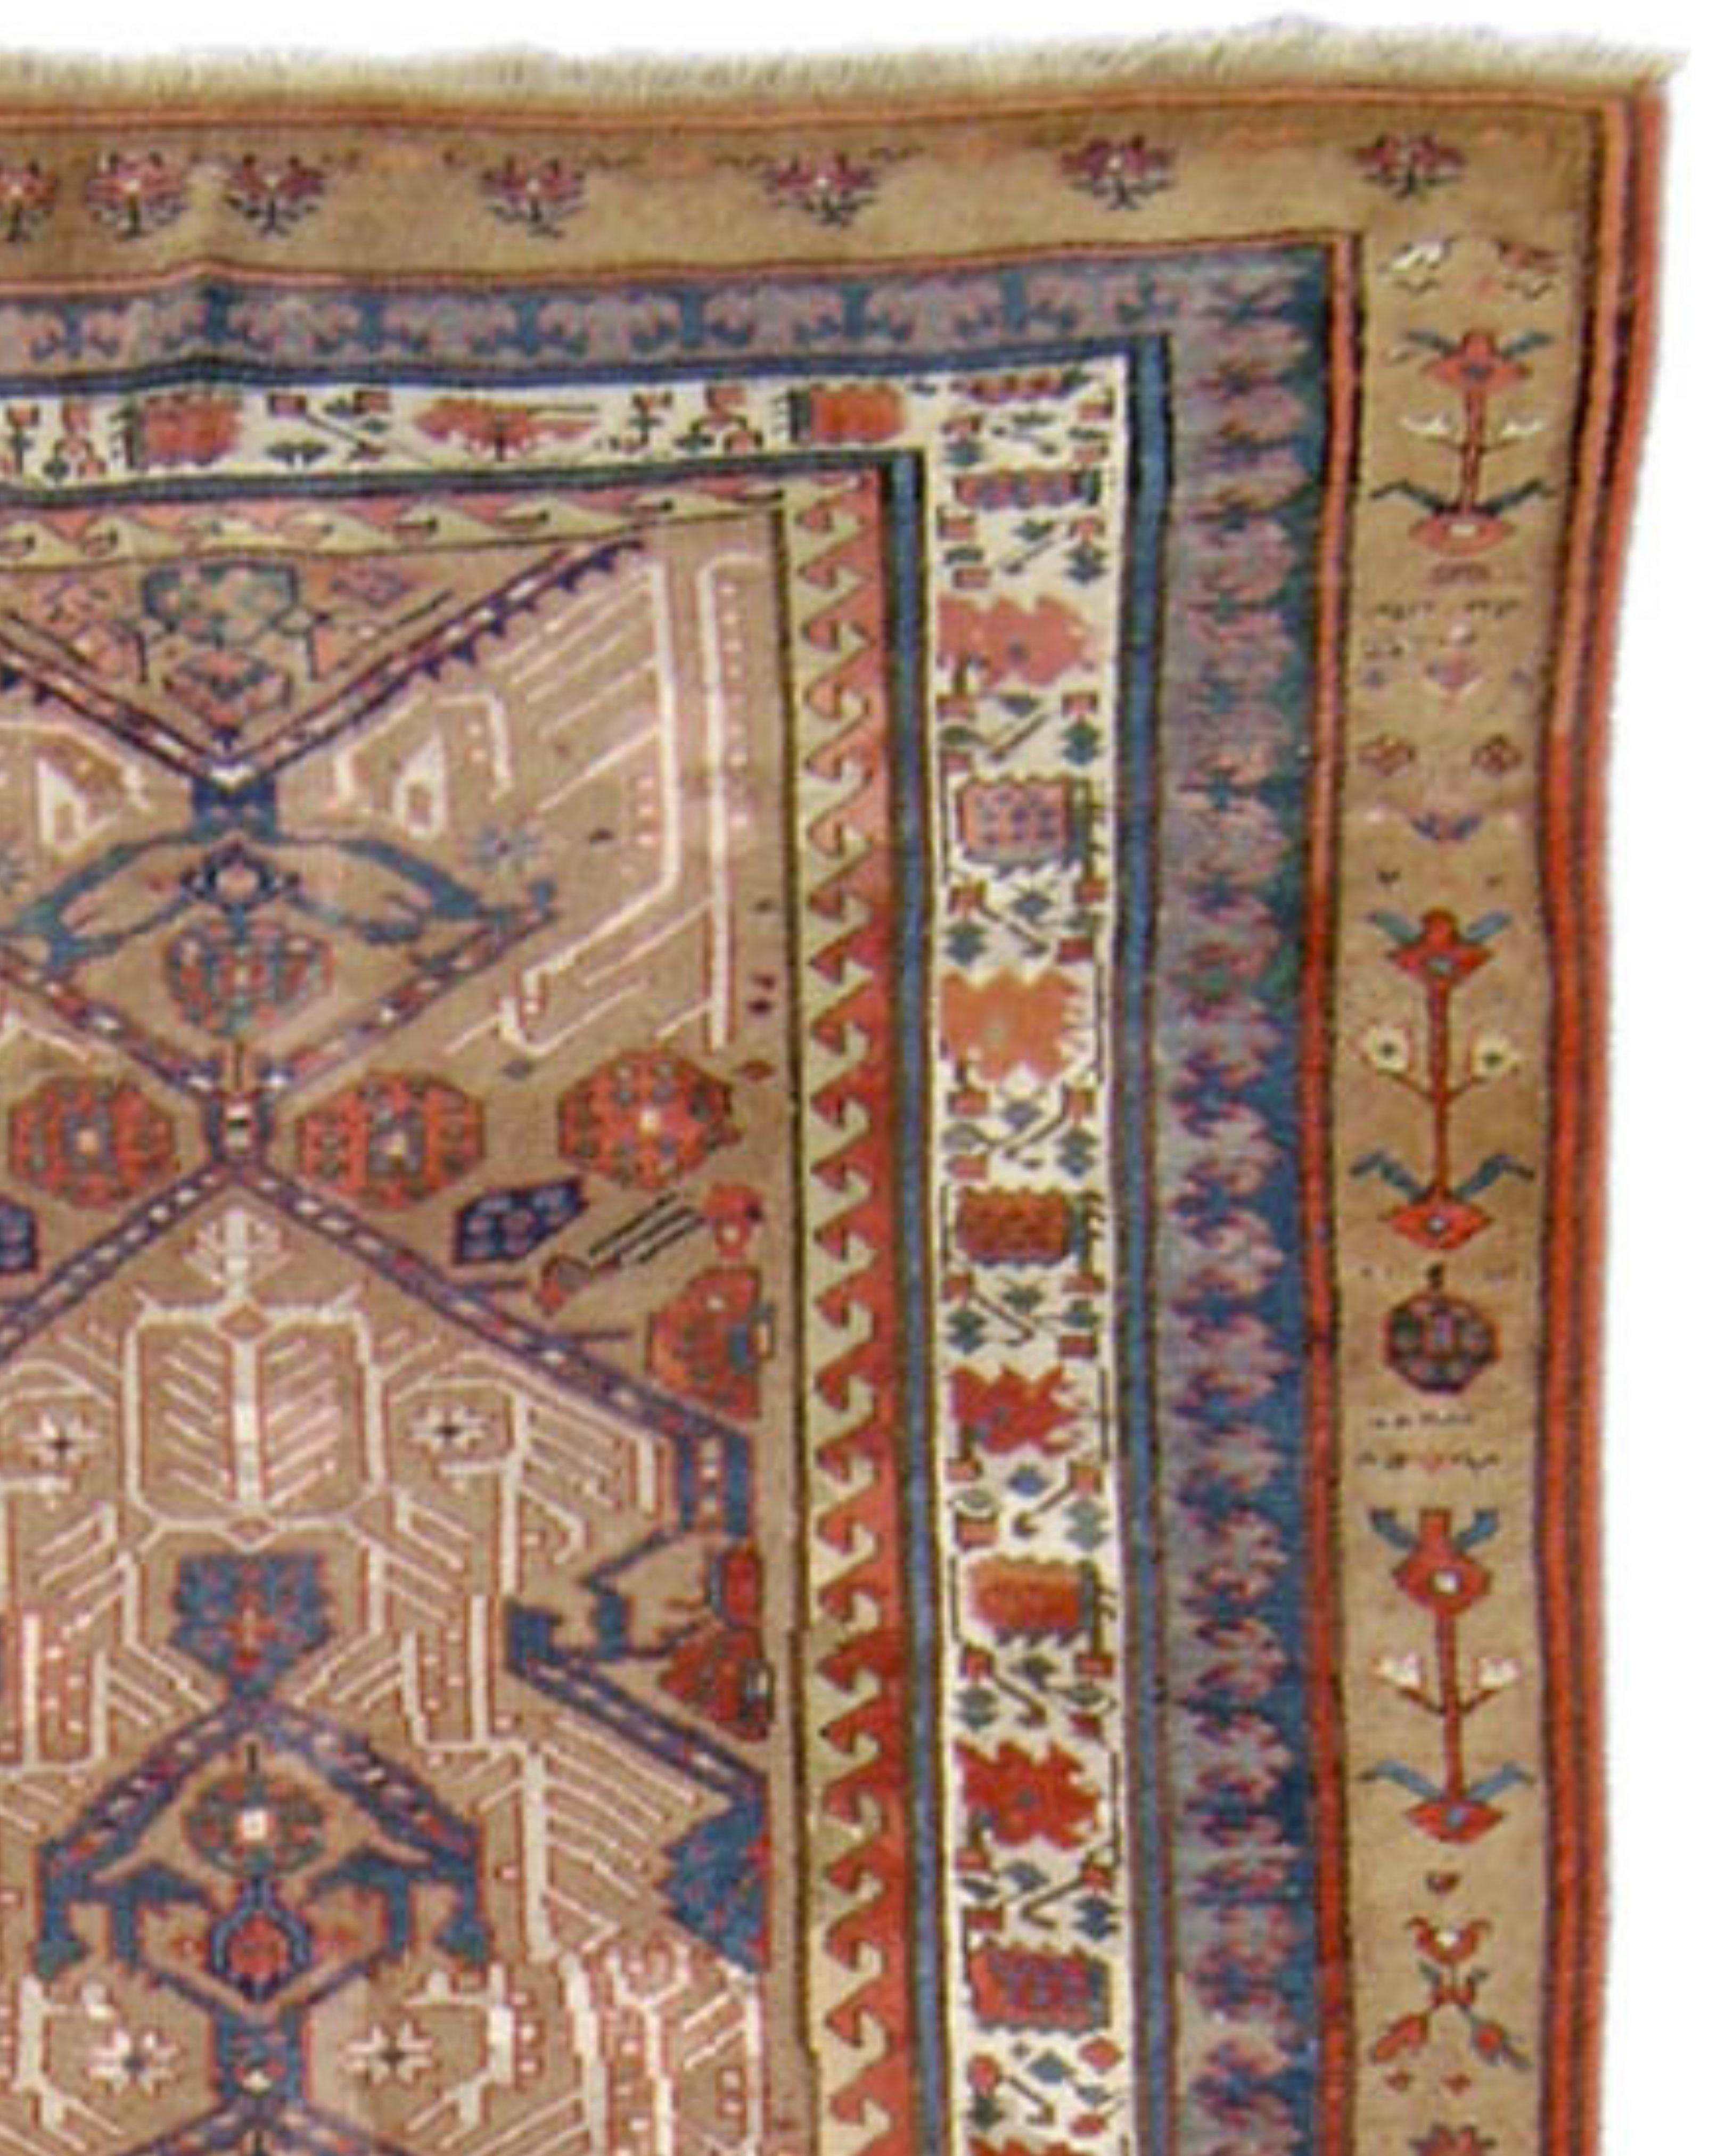 Antique Persian Serab Rug, 19th century

Additional Information:
Dimensions: 4'11